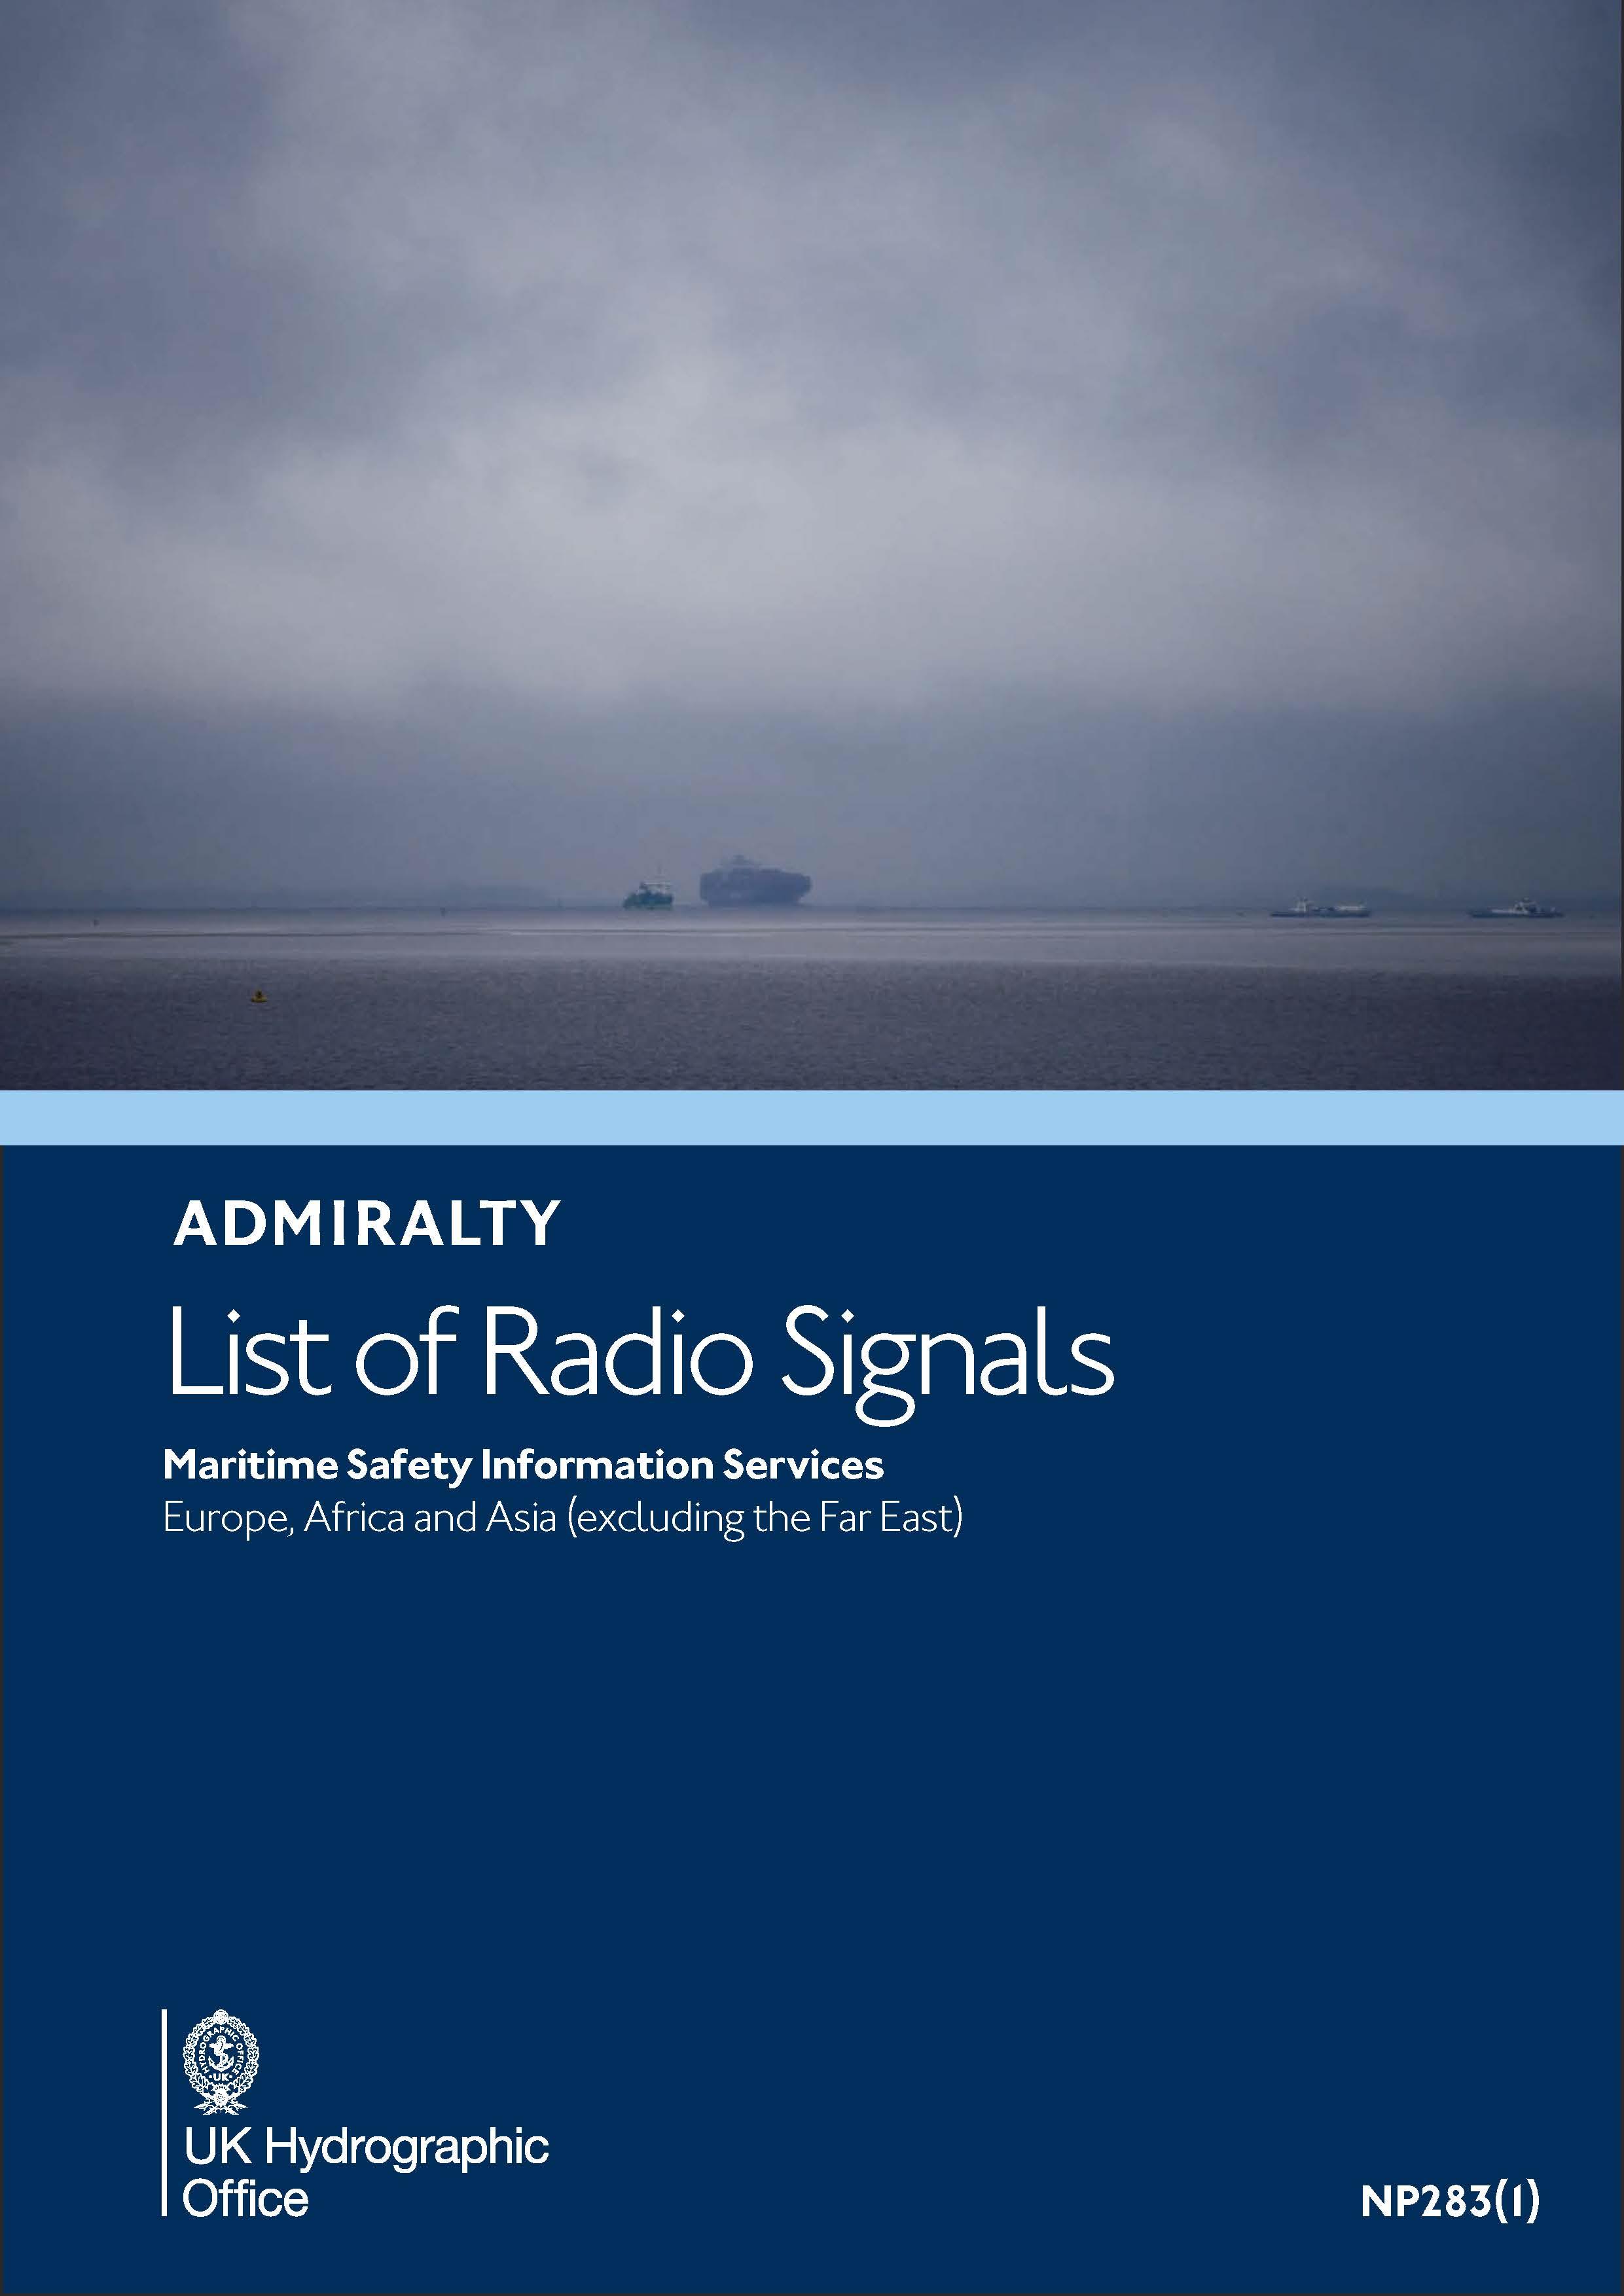 ADMIRALTY NP283(1) RadioSignals Maritime Safety Information - EMEA